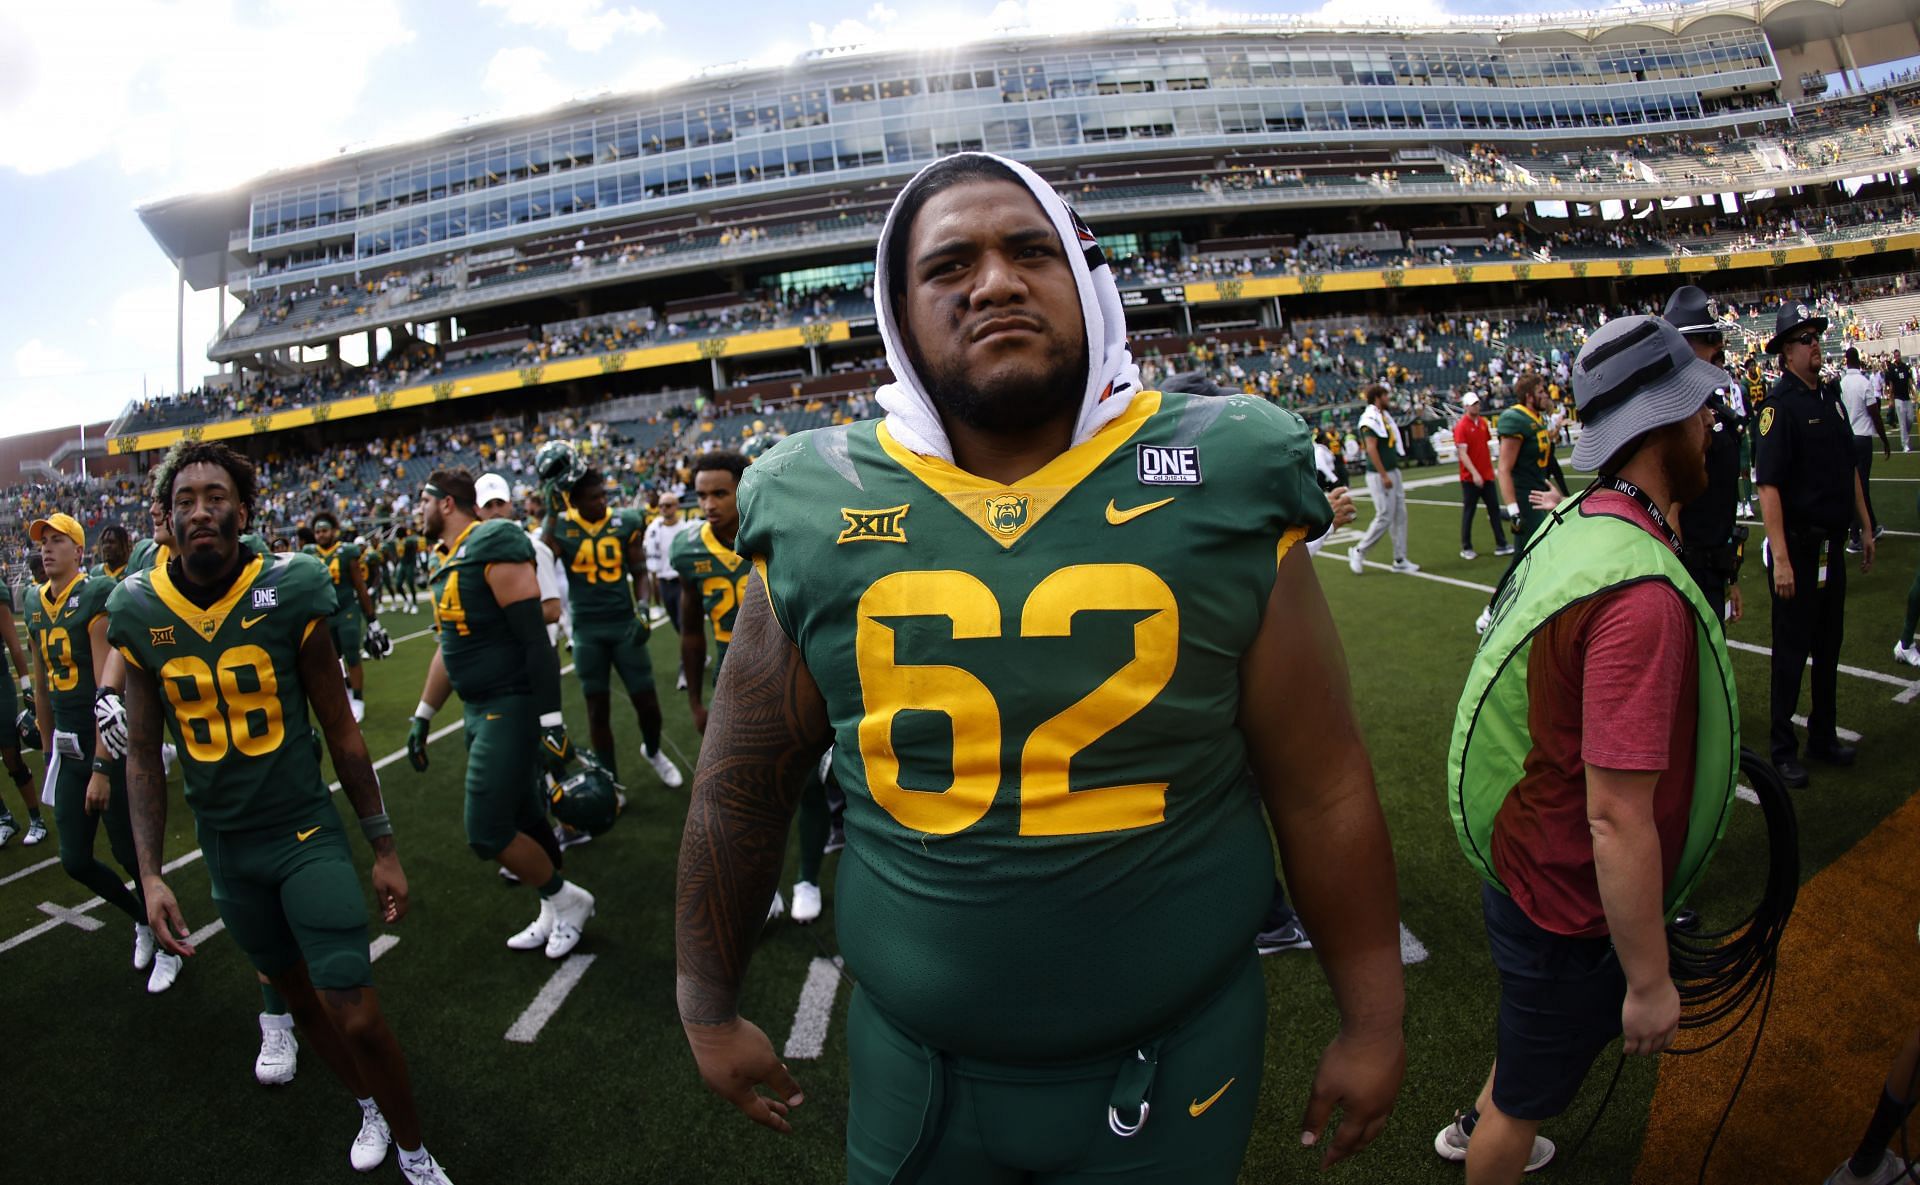 Siaki Ika #62 of the Baylor Bears walks off the field following Baylors 42-7 win over Texas State 